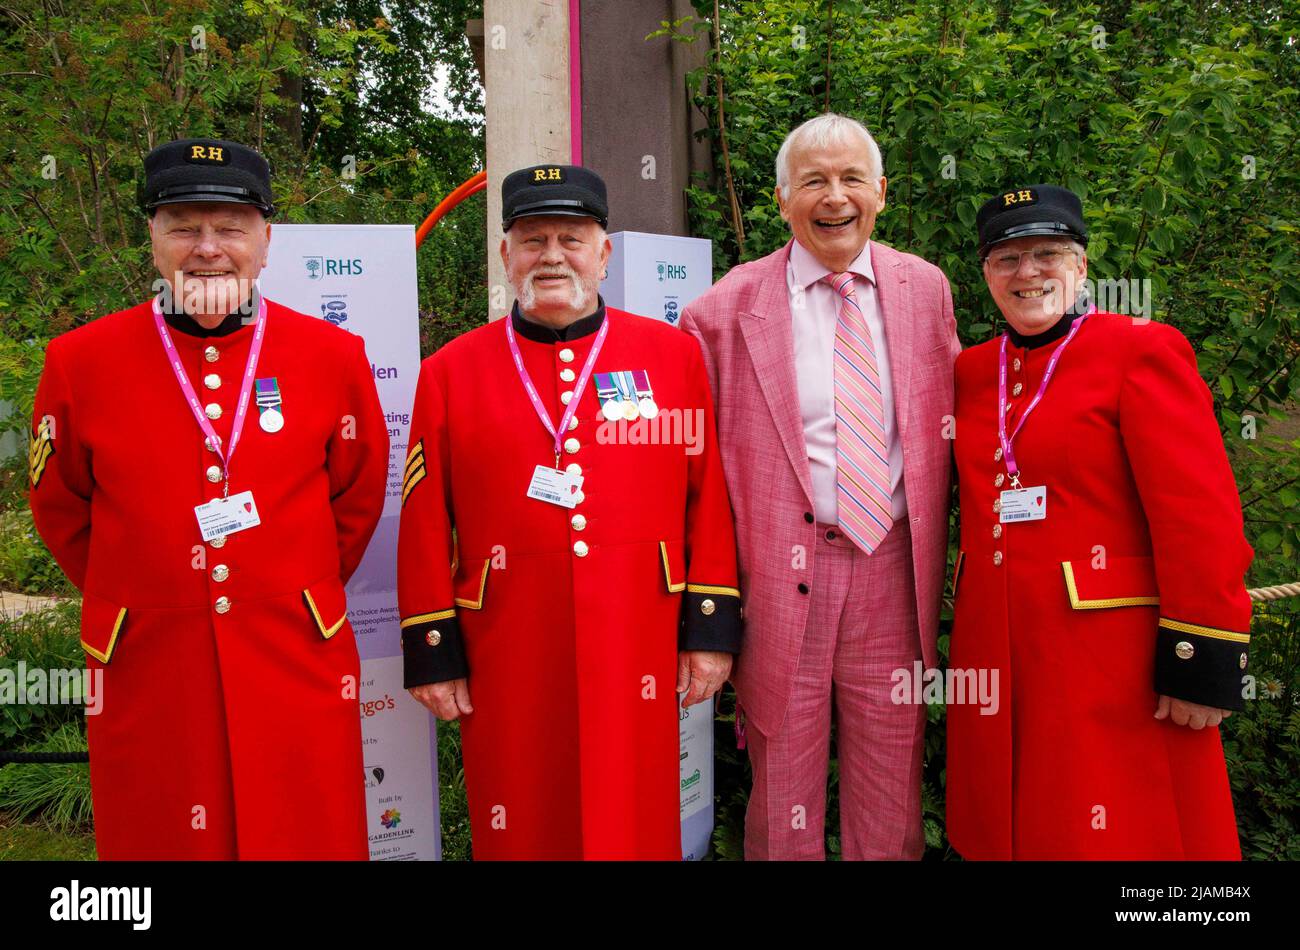 Actor and television presenter, Christopher Biggins with Chelsea Pensioners at the RHS Chelsea Flower Show. Stock Photo